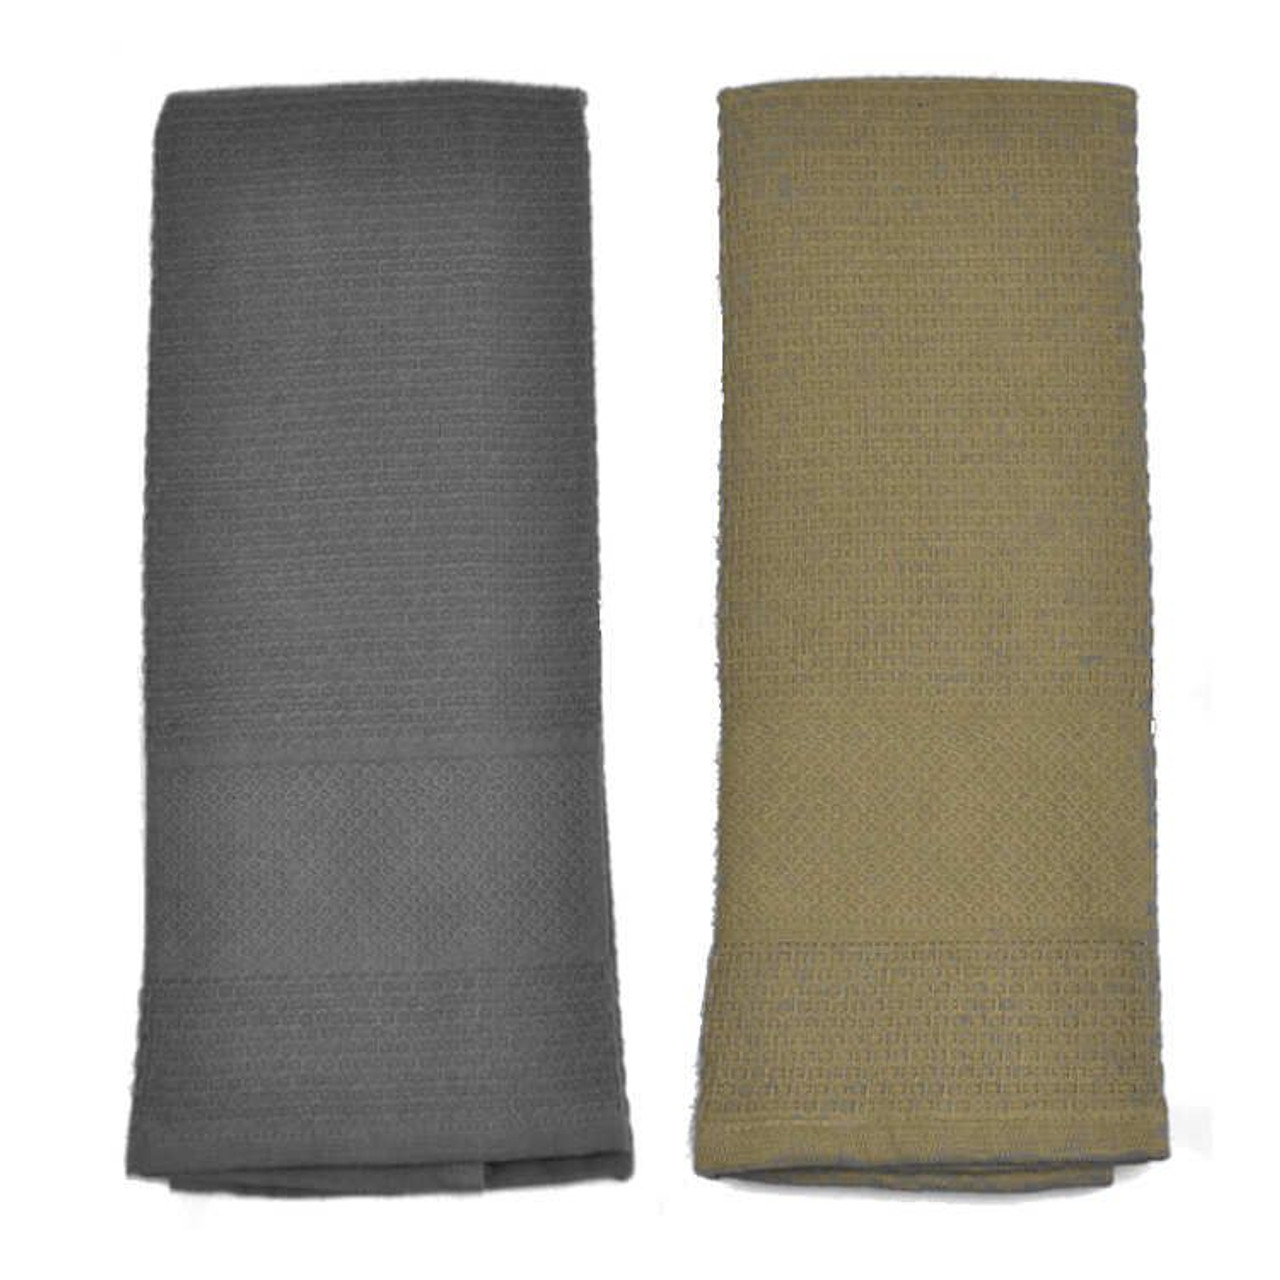 https://cdn11.bigcommerce.com/s-q0oajb576s/images/stencil/1280x1280/products/1157/3196/palmetto-home-kitchen-towels-15x25-solid-charcoal-sand-micro-waffle-weave-100-cotton-17__87389.1680199091.jpg?c=1